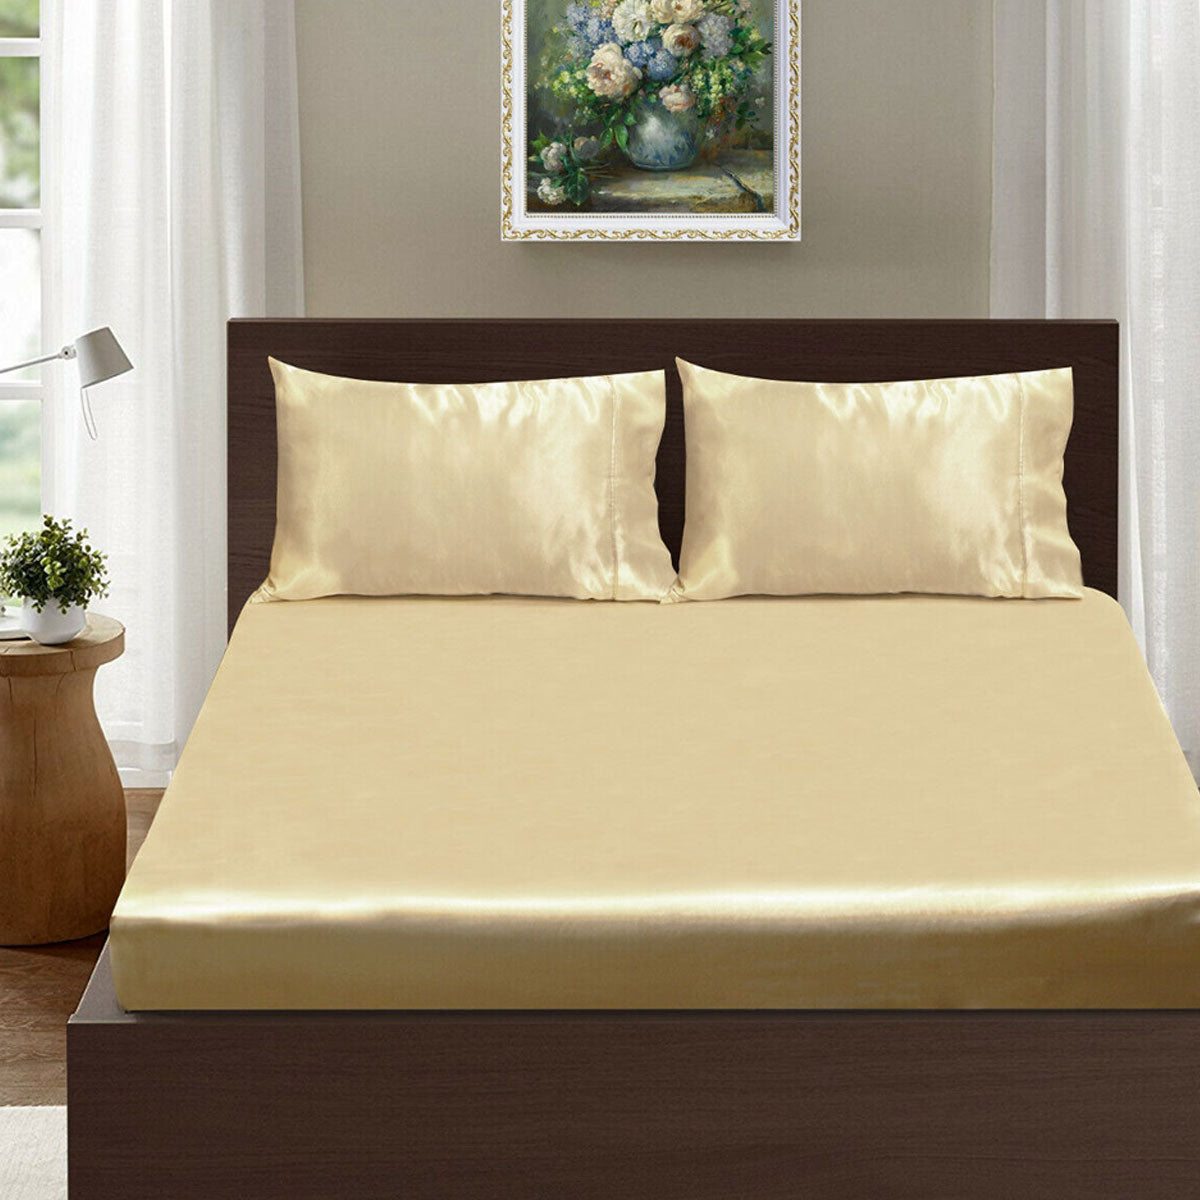 Ramesses Casablanca Satin Fitted Sheet Combo Set Champagne Queen